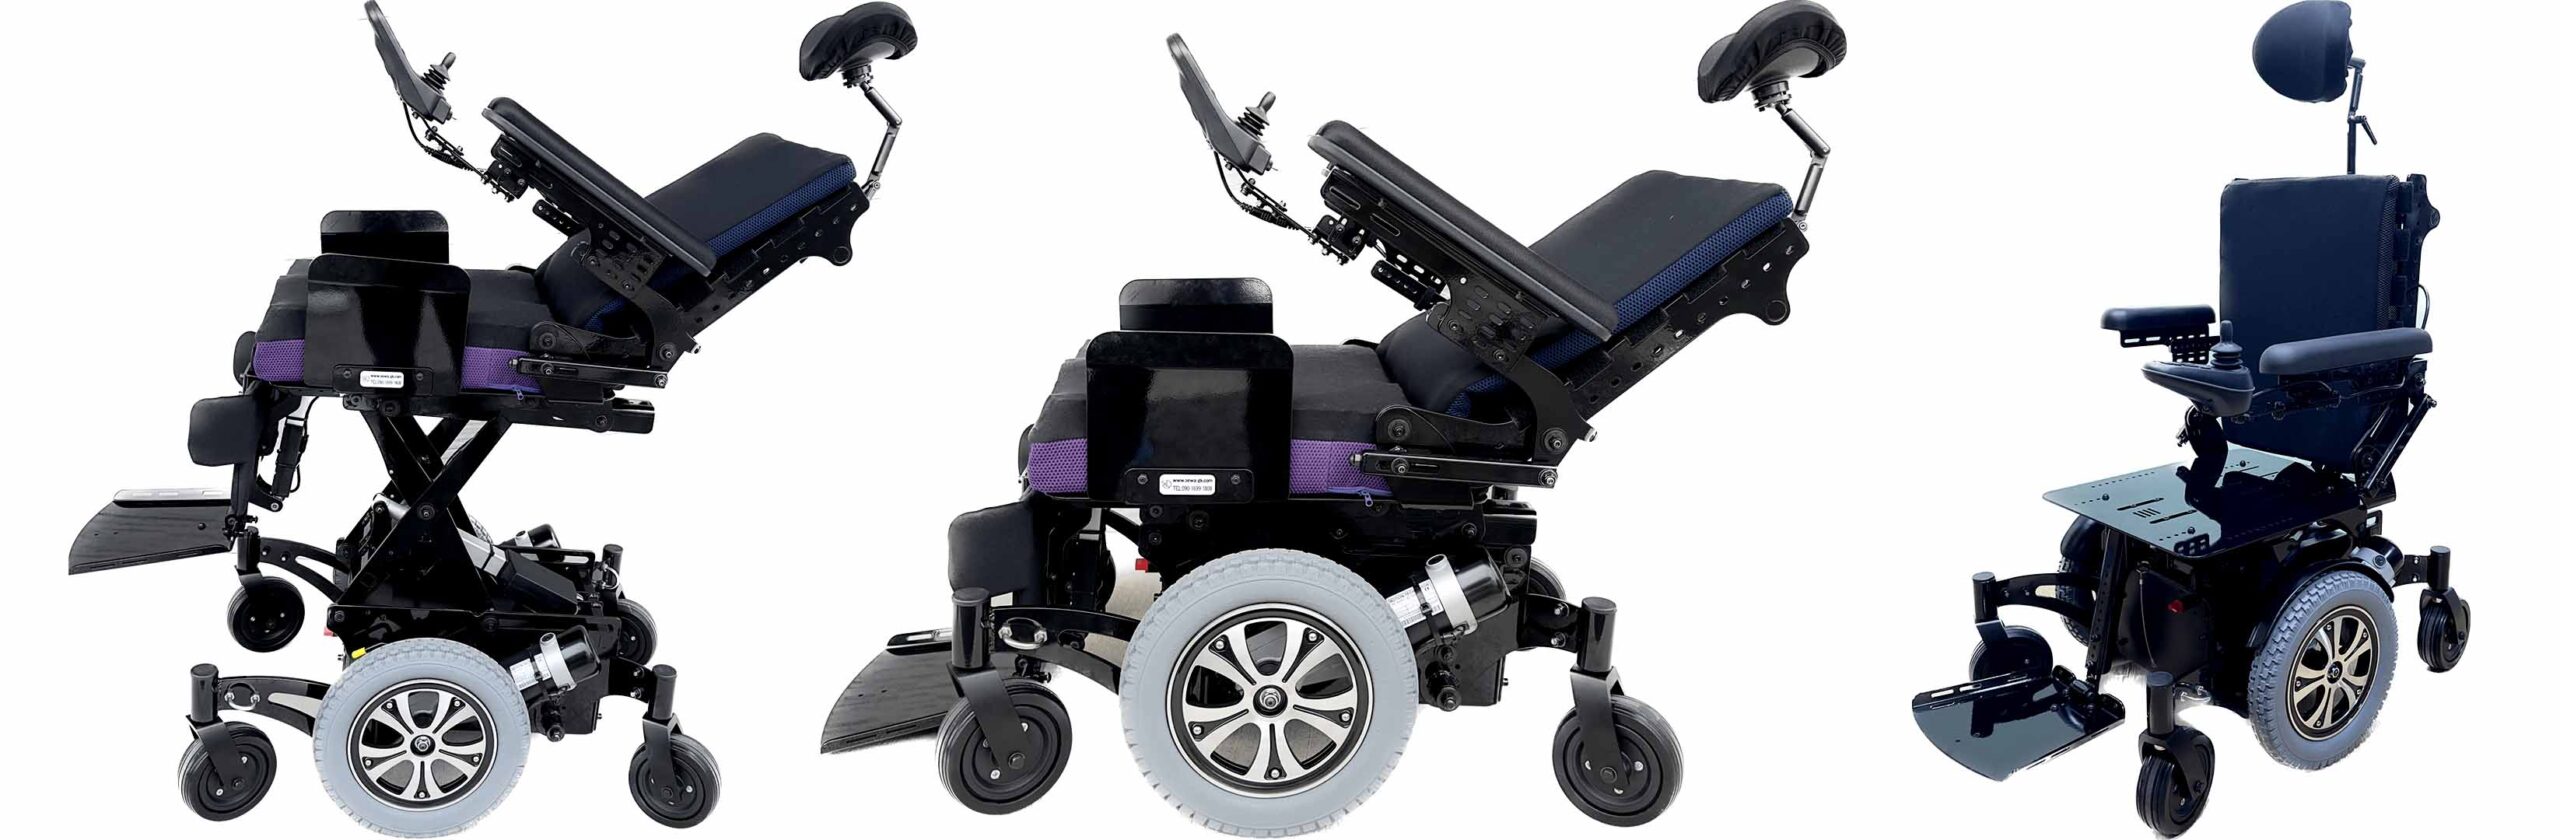 customized wheelchairs in japan